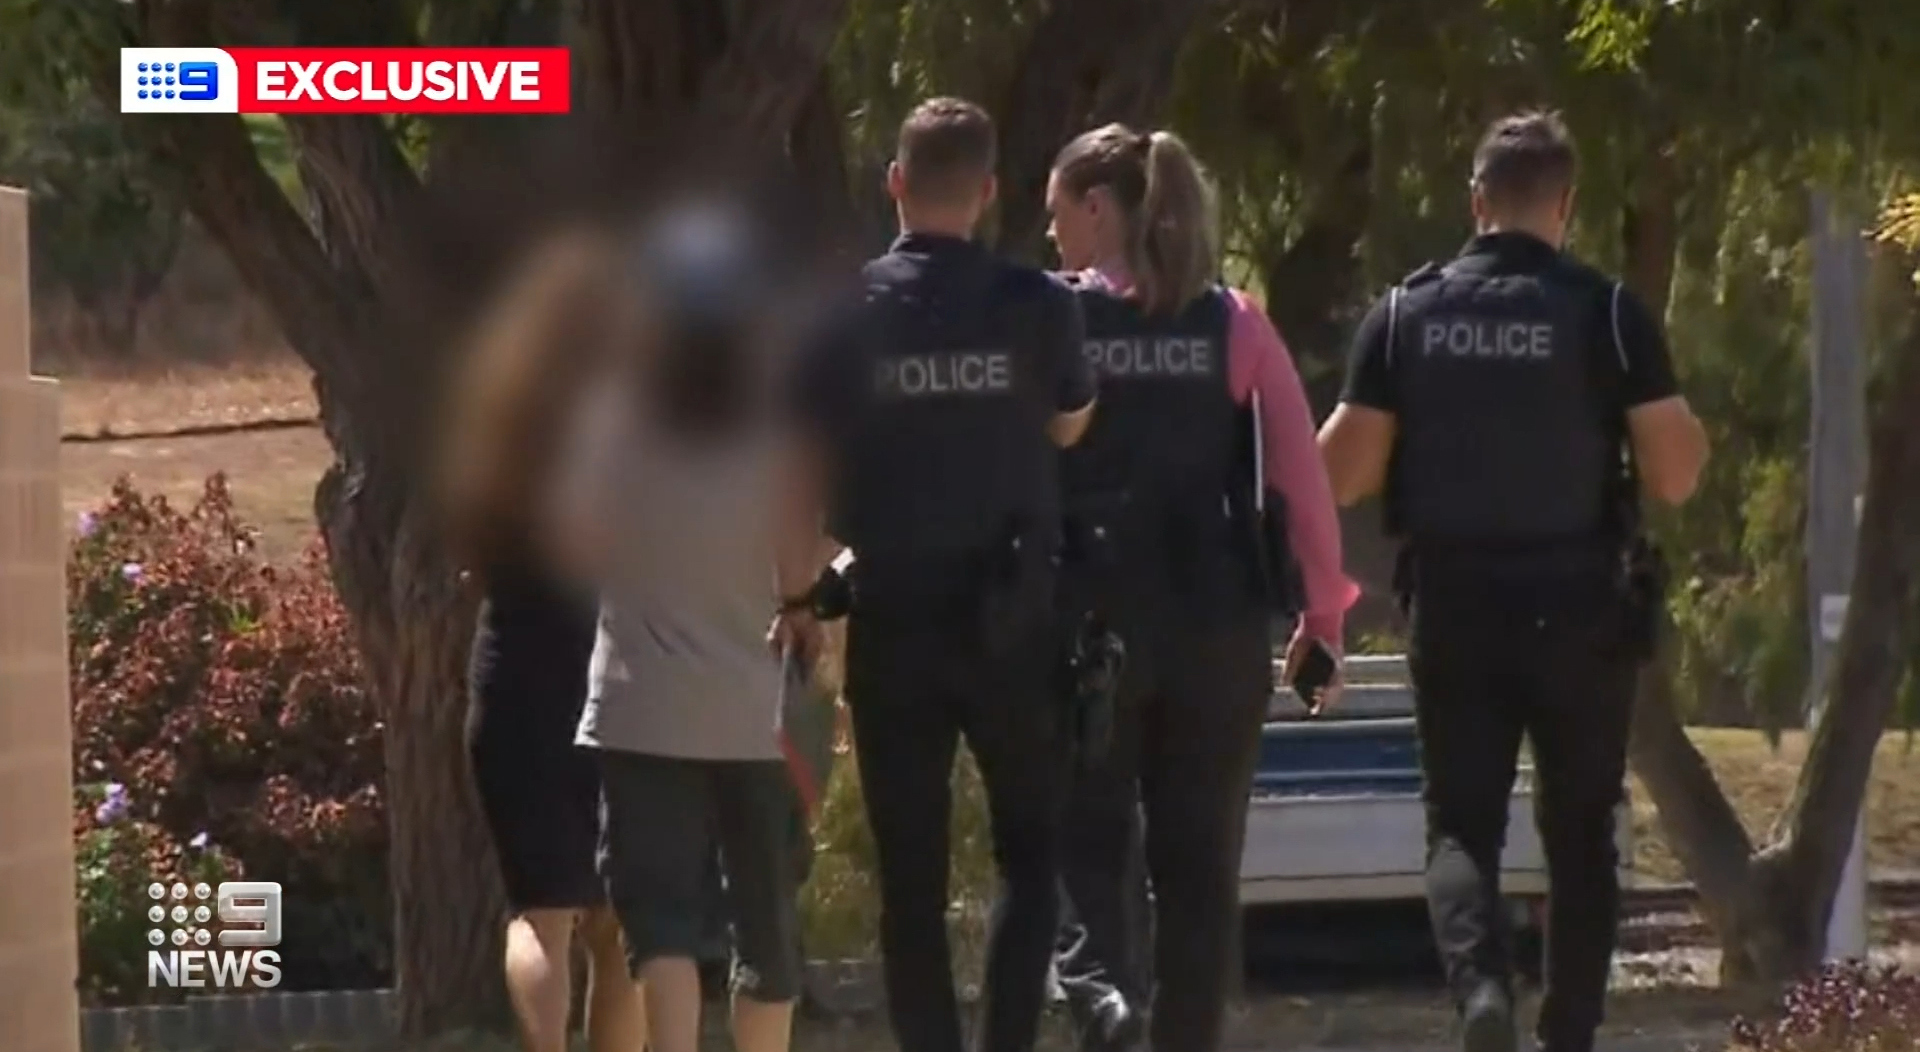 Police are probing an abduction scare in Perth's southern suburbs with claims a girl narrowly escaped being pulled into a car.Witnesses say chilling screams rang out over the neighbourhood before a vehicle sped away.